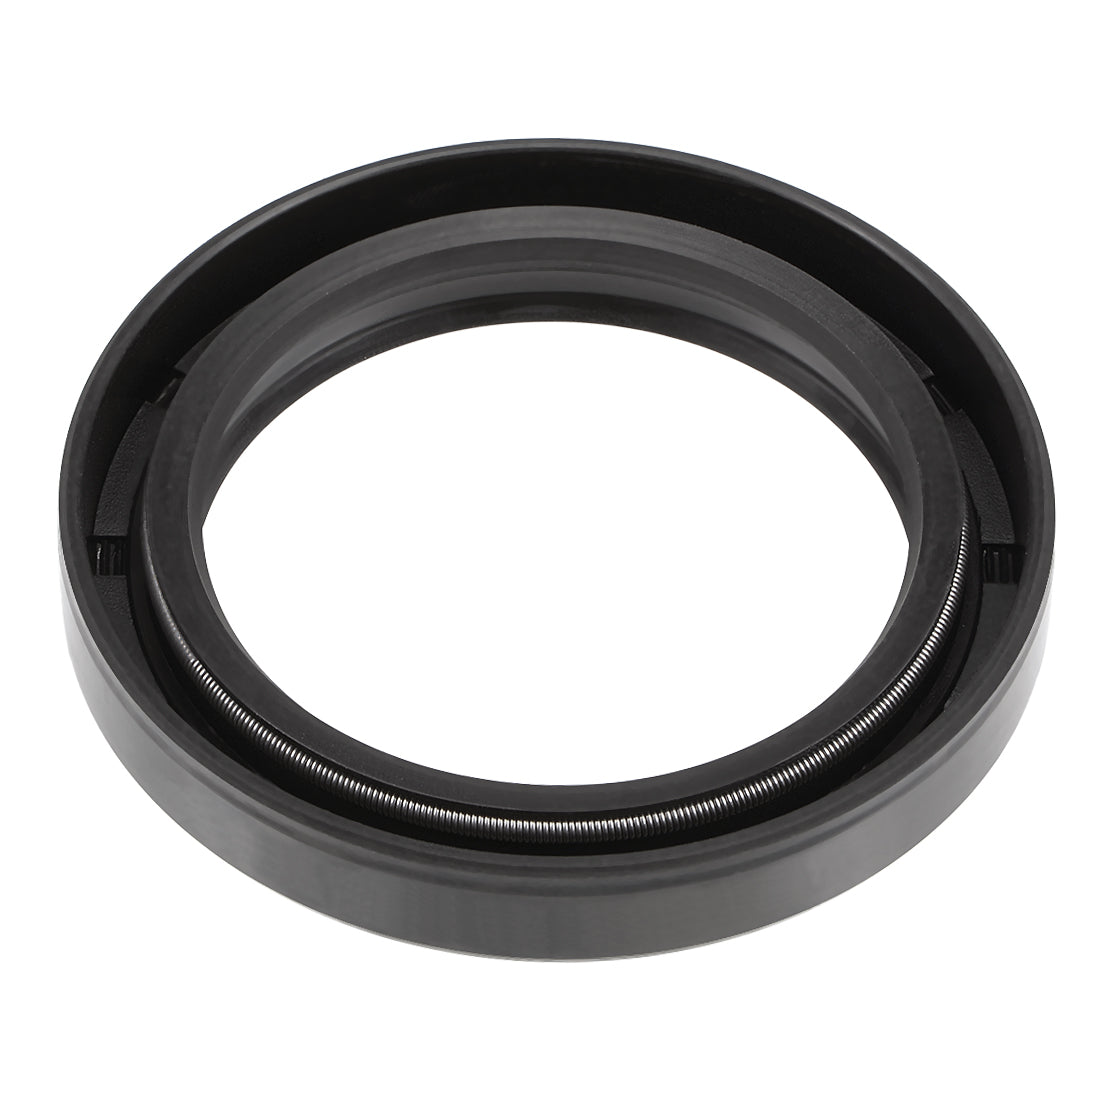 uxcell Uxcell Oil Seal, TC 50mm x 68mm x 10mm, Nitrile Rubber Cover Double Lip